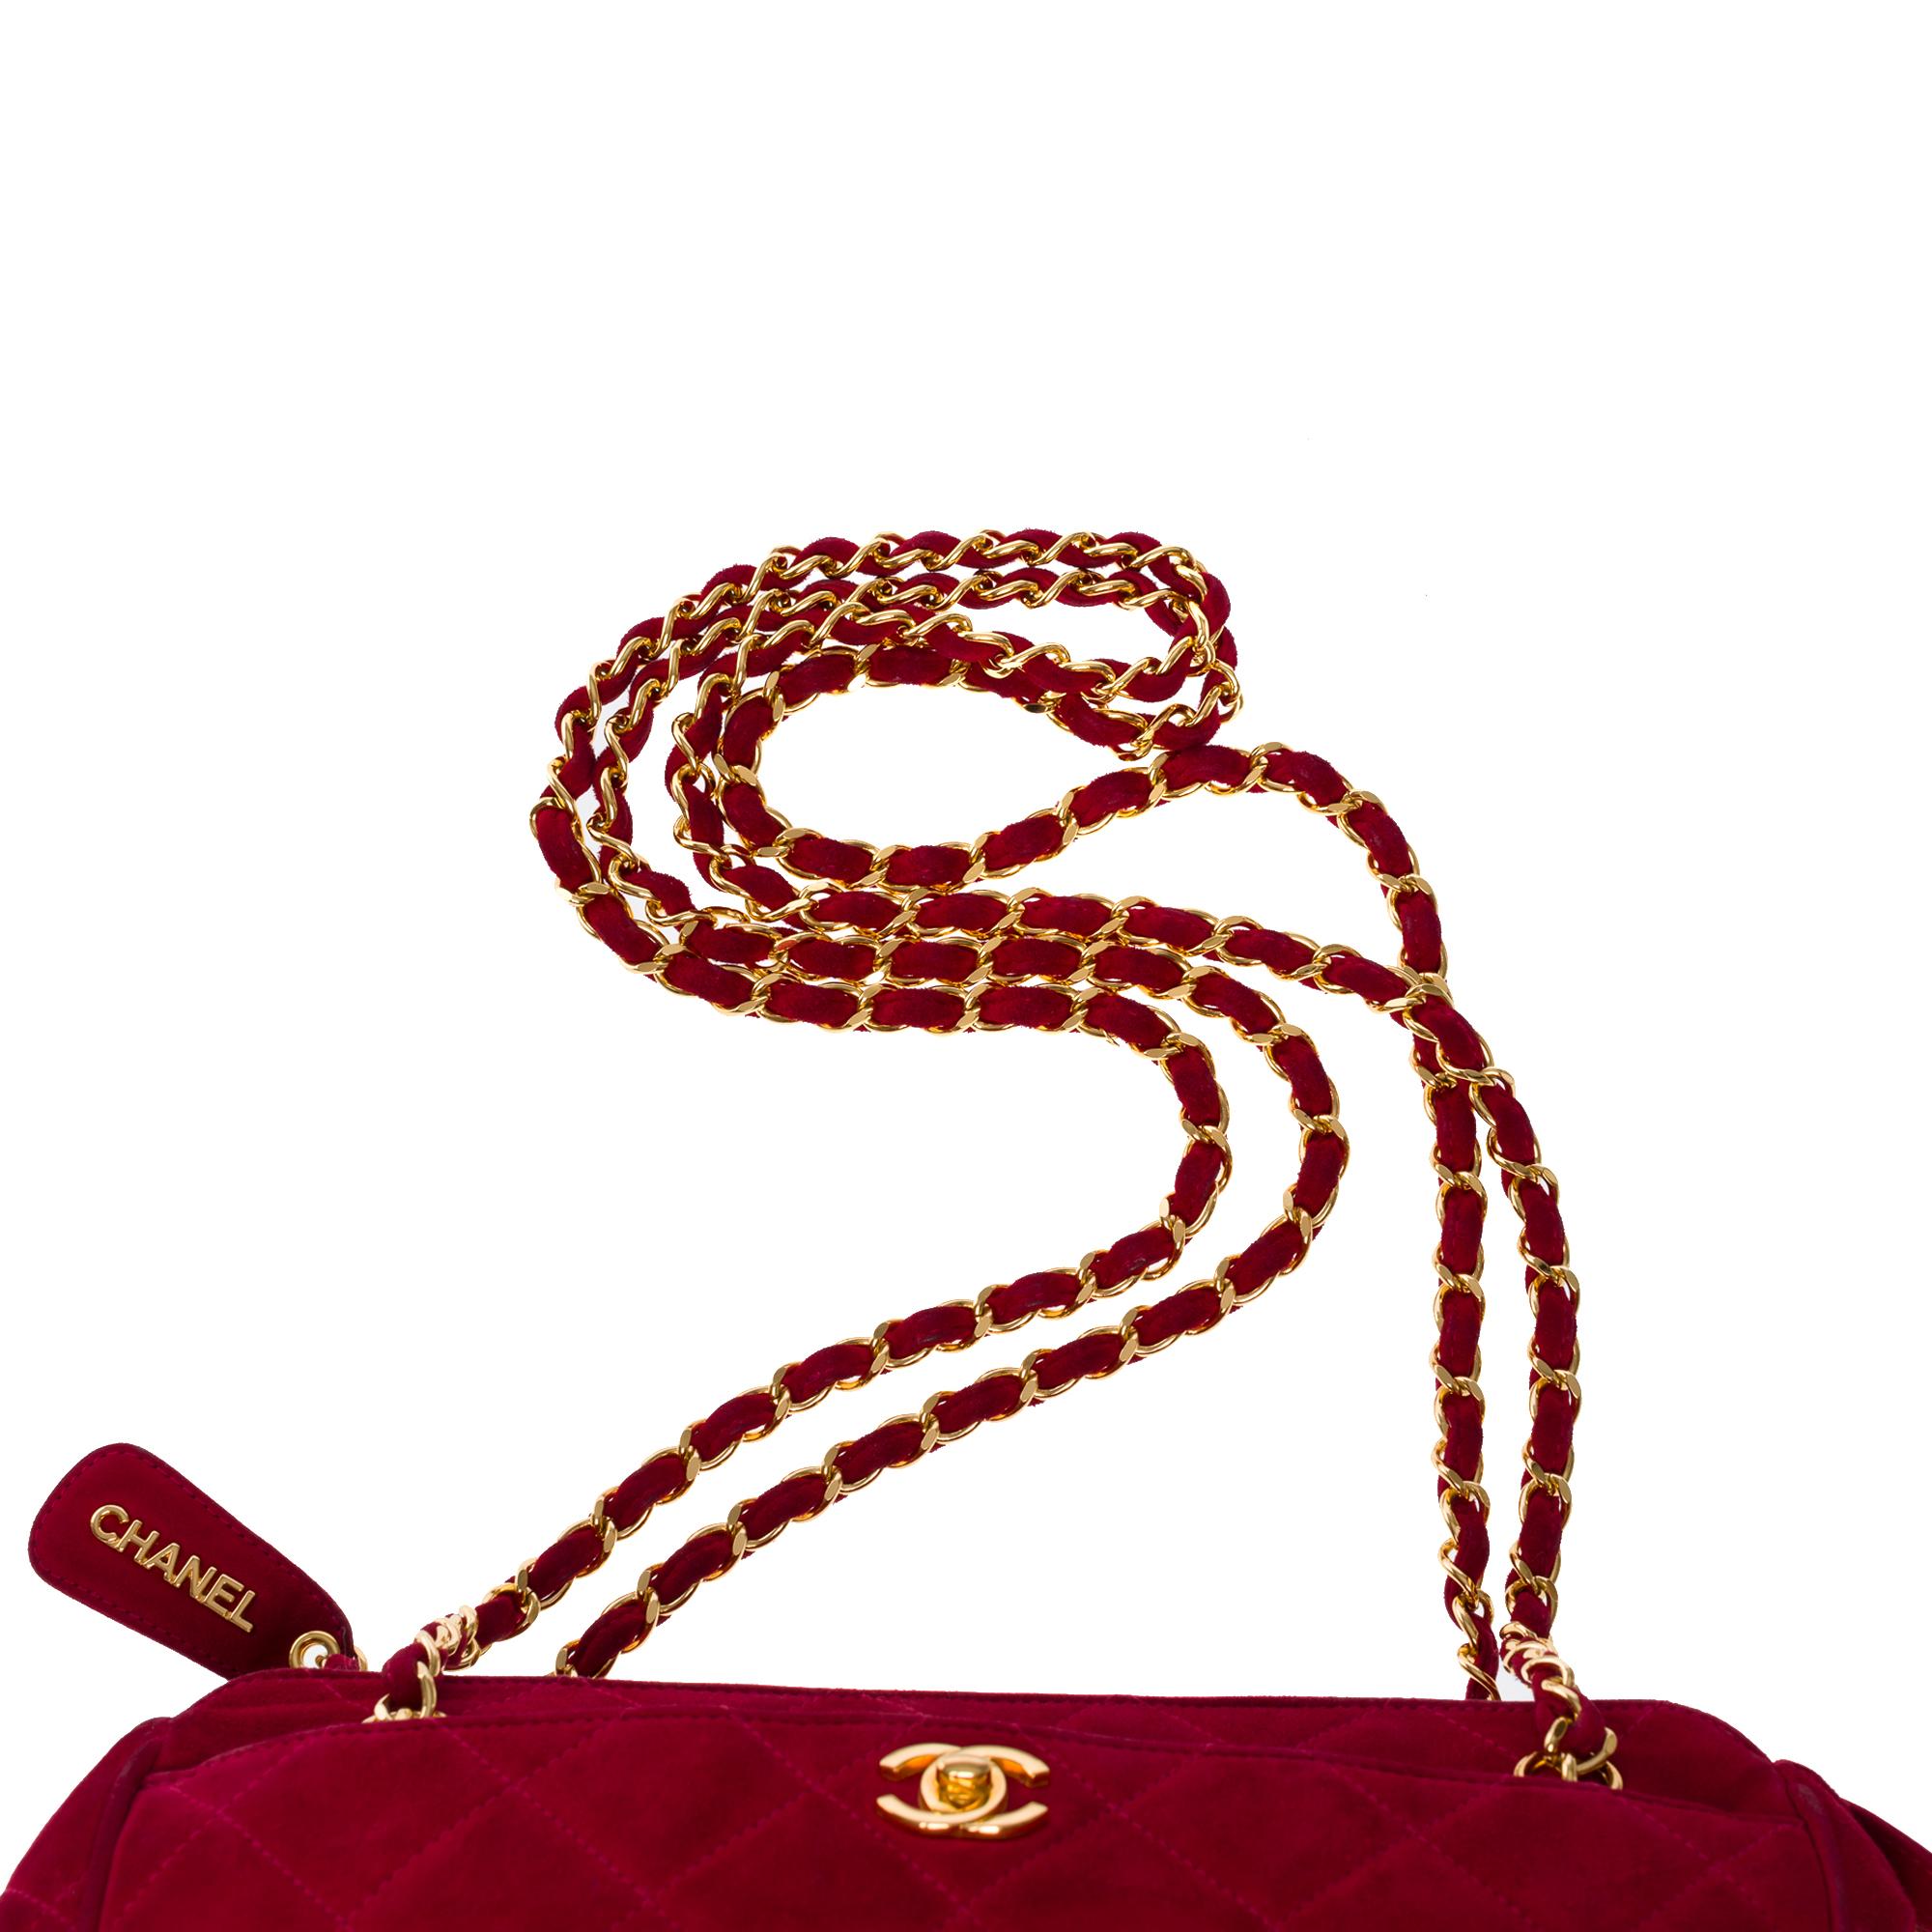 Gorgeous Chanel Camera shoulder bag in red suede, GHW 4